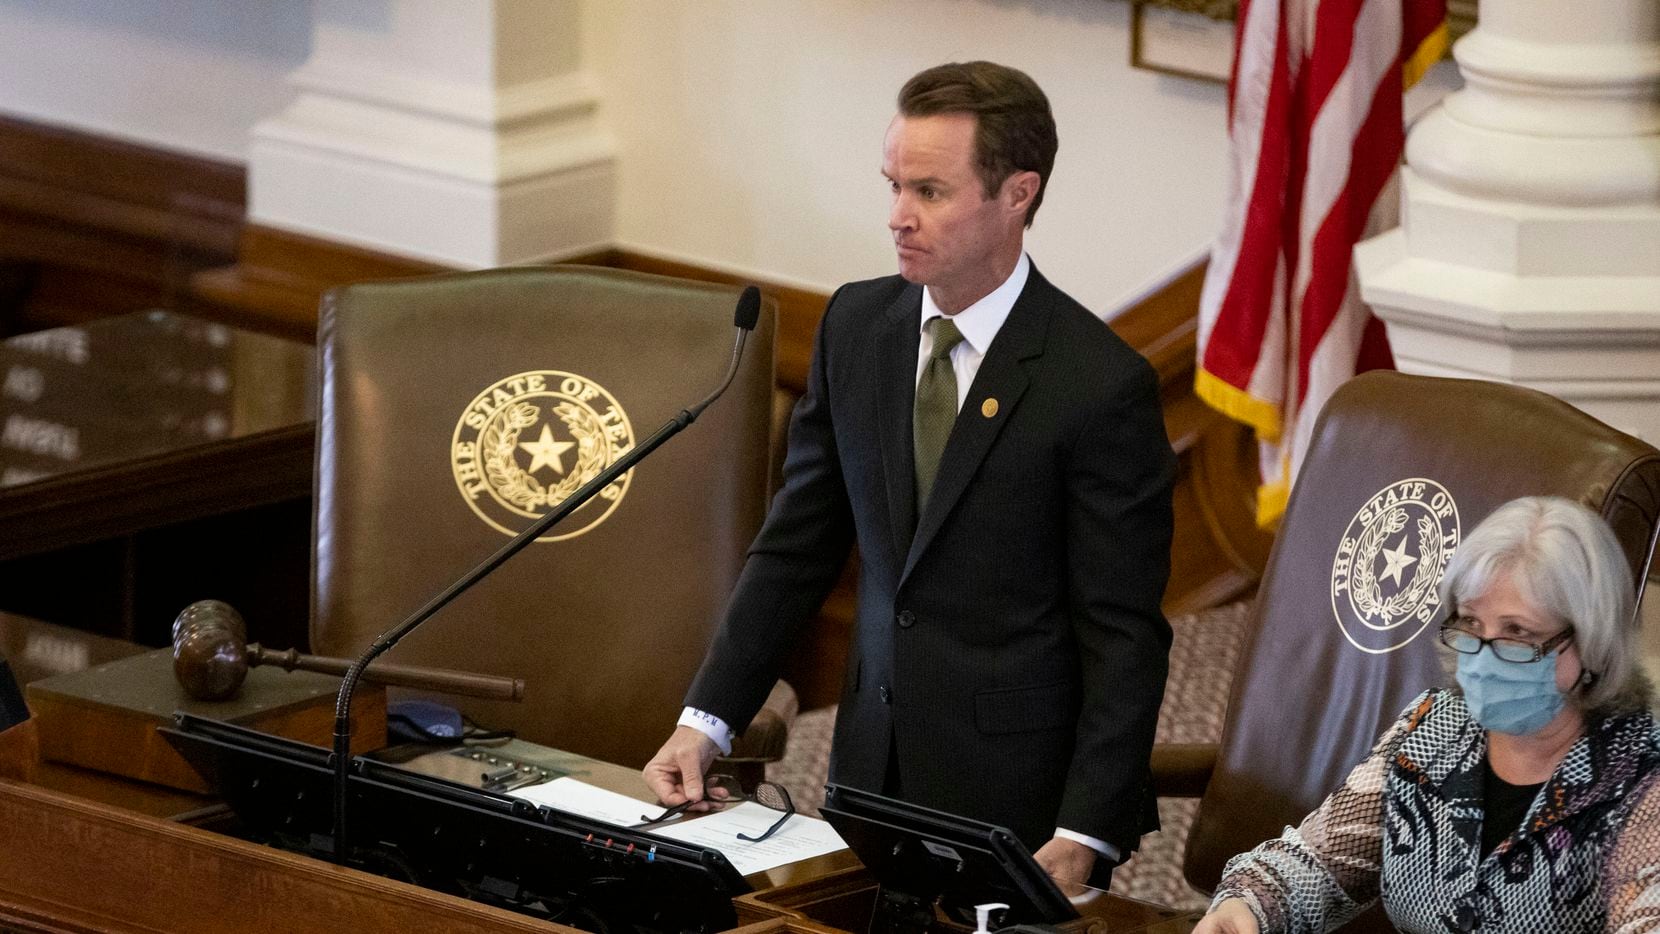 House Speaker Dade Phelan stands at the dais in the House chamber of the Texas Capitol in Austin on Wednesday, March 17, 2021. (Juan Figueroa/ The Dallas Morning News)